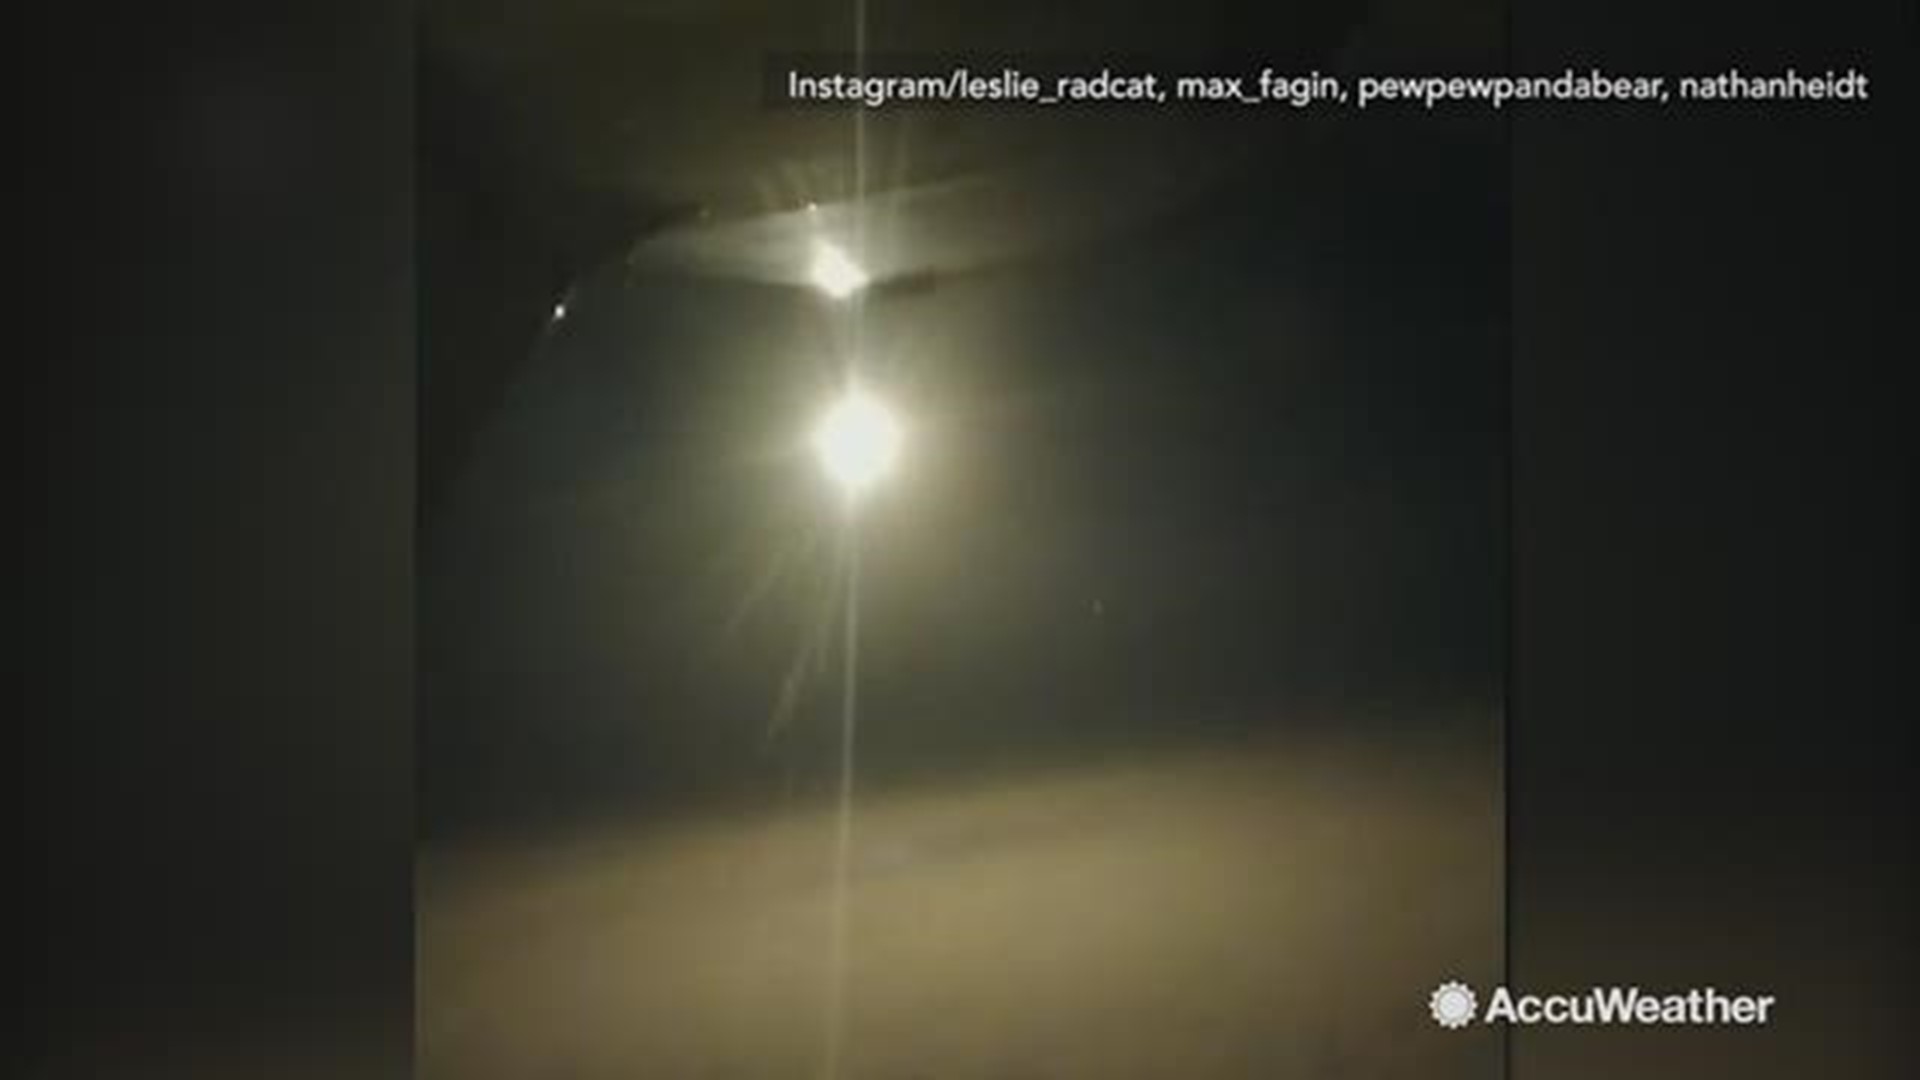 NASA recently launched the Insight probe for Mars in the early morning of May 5 from the Vandenberg Air Force base in California.  This incredible view of the launch was captured from an airplane.